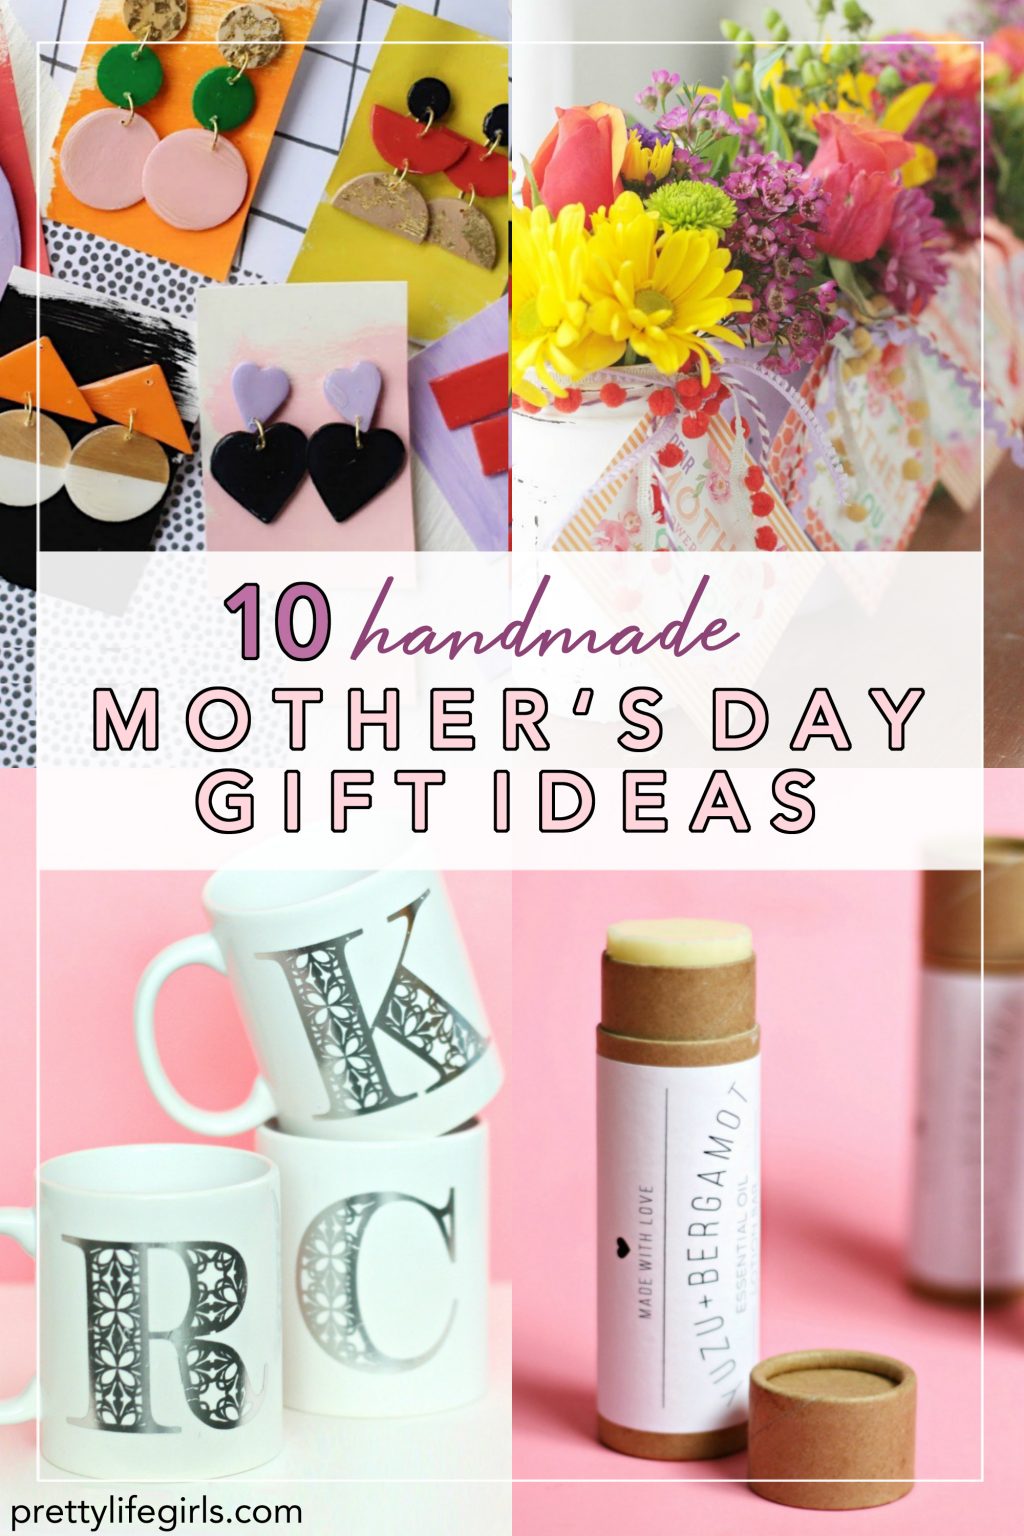 Ten Handmade Mother's Day Gift Ideas + a tutorial featured by Top US Craft Blog + The Pretty Life Girls